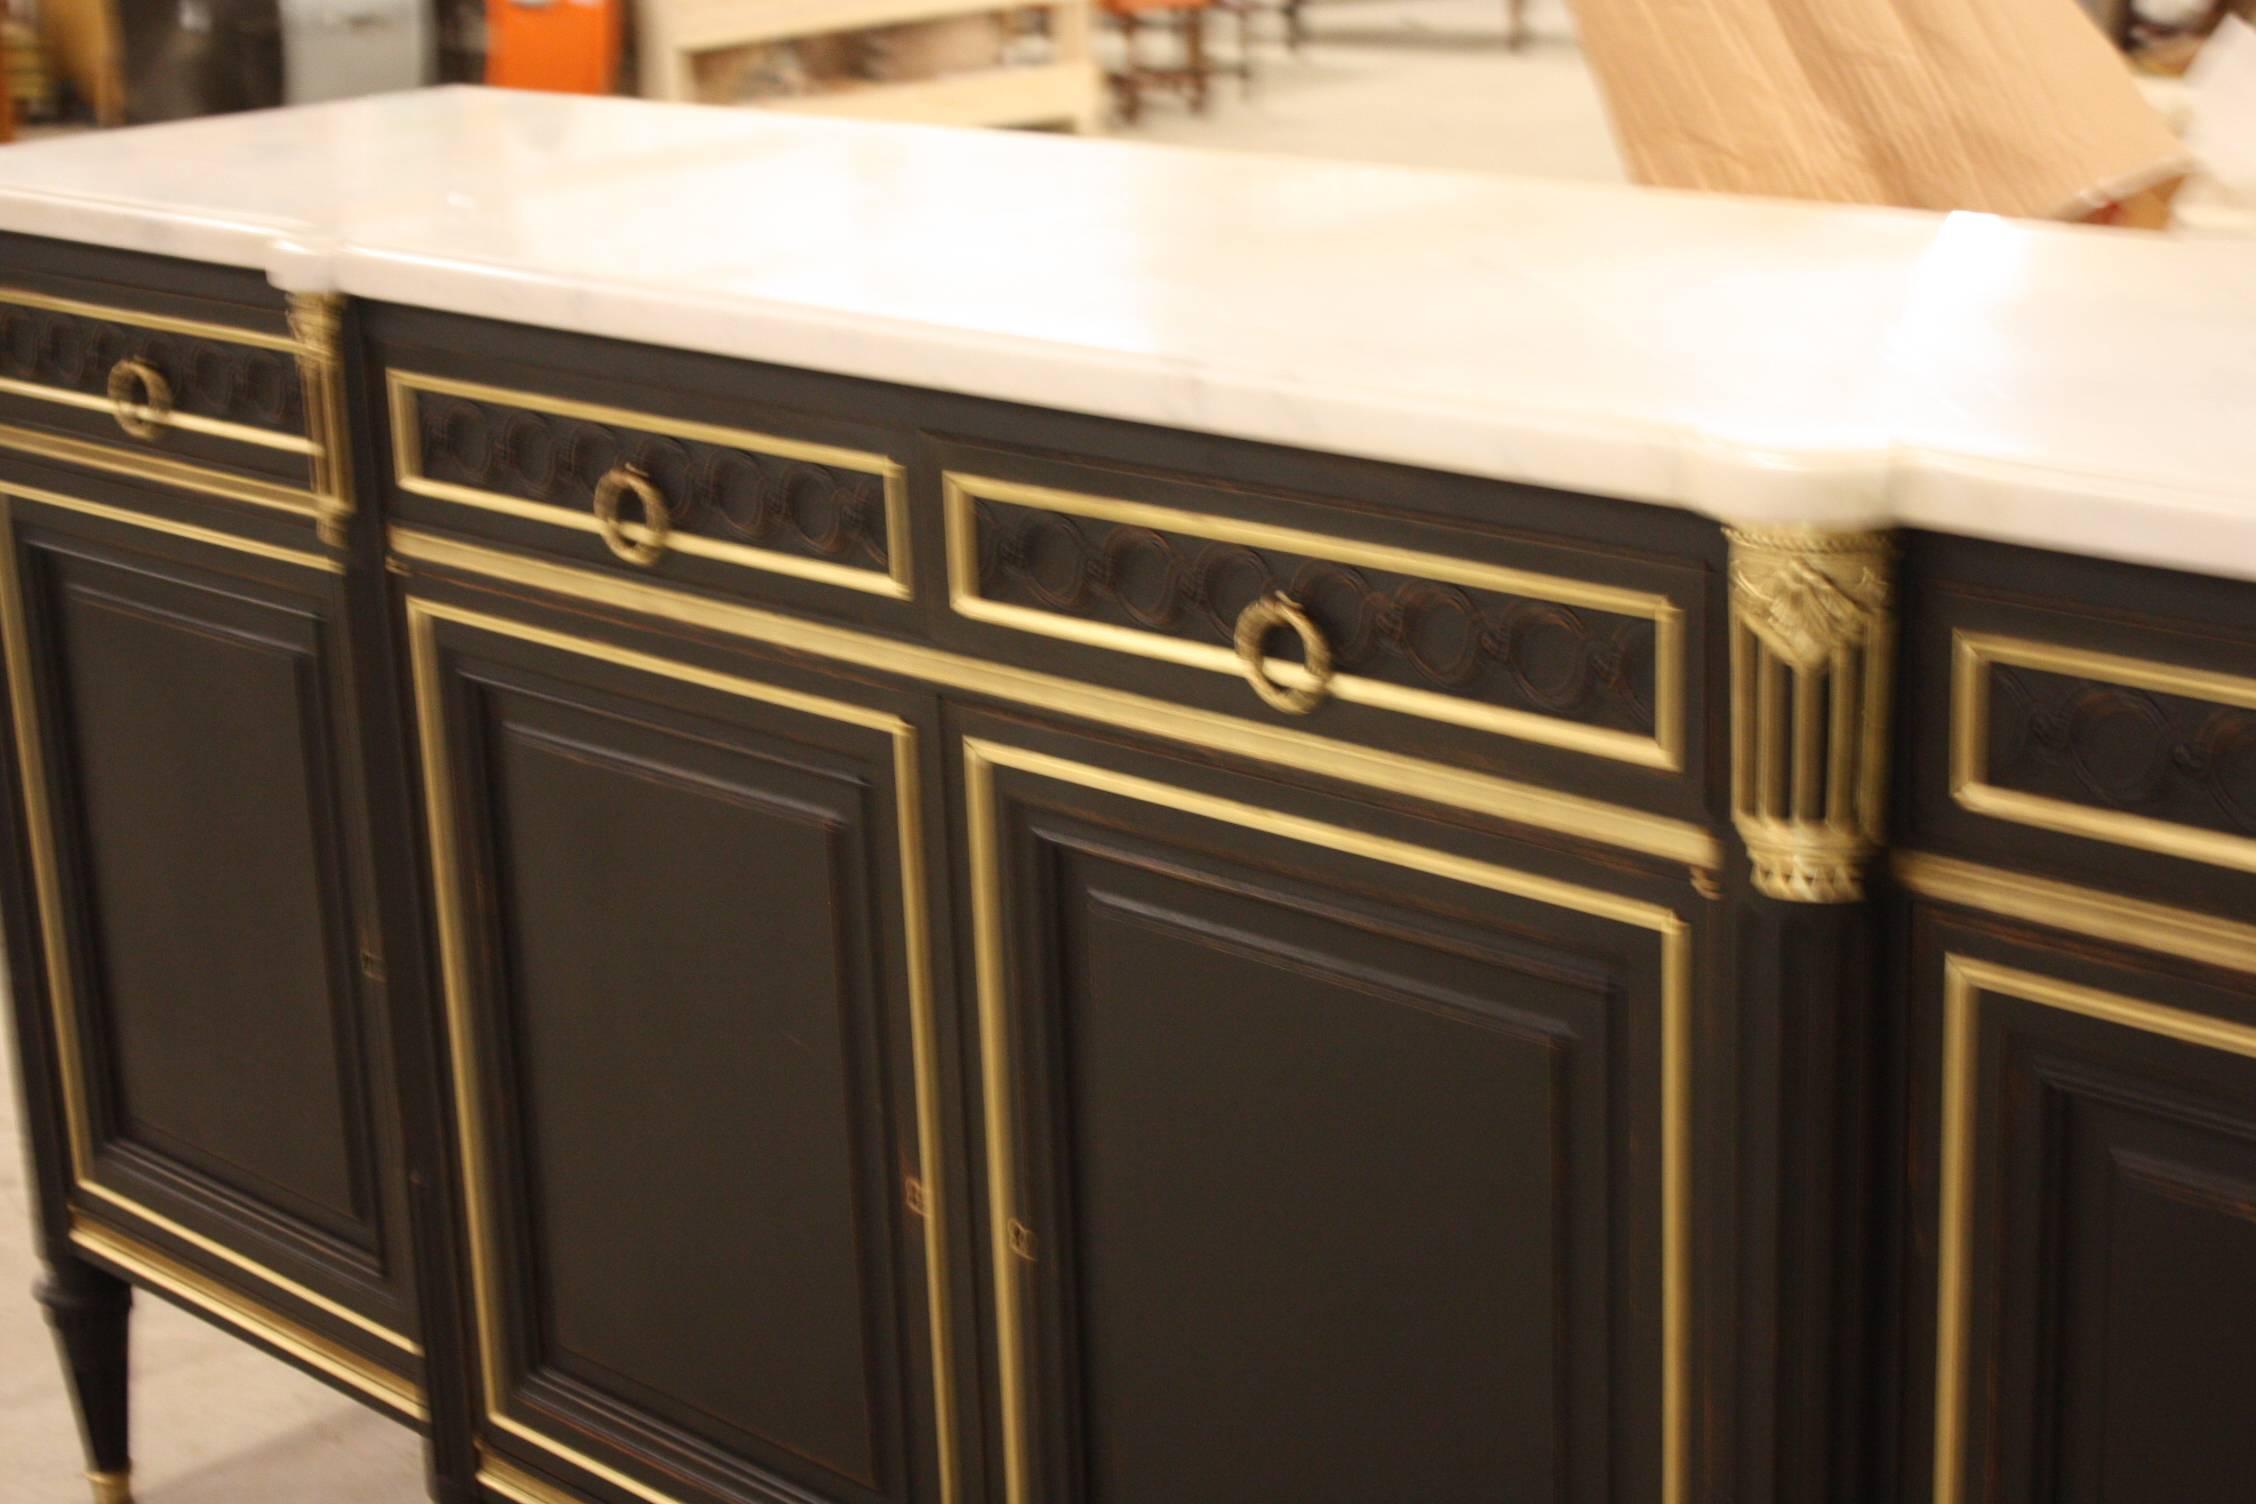 French Louis XVI buffet in a traditional ebonized finish with an exquisite white with gray veining marble top.